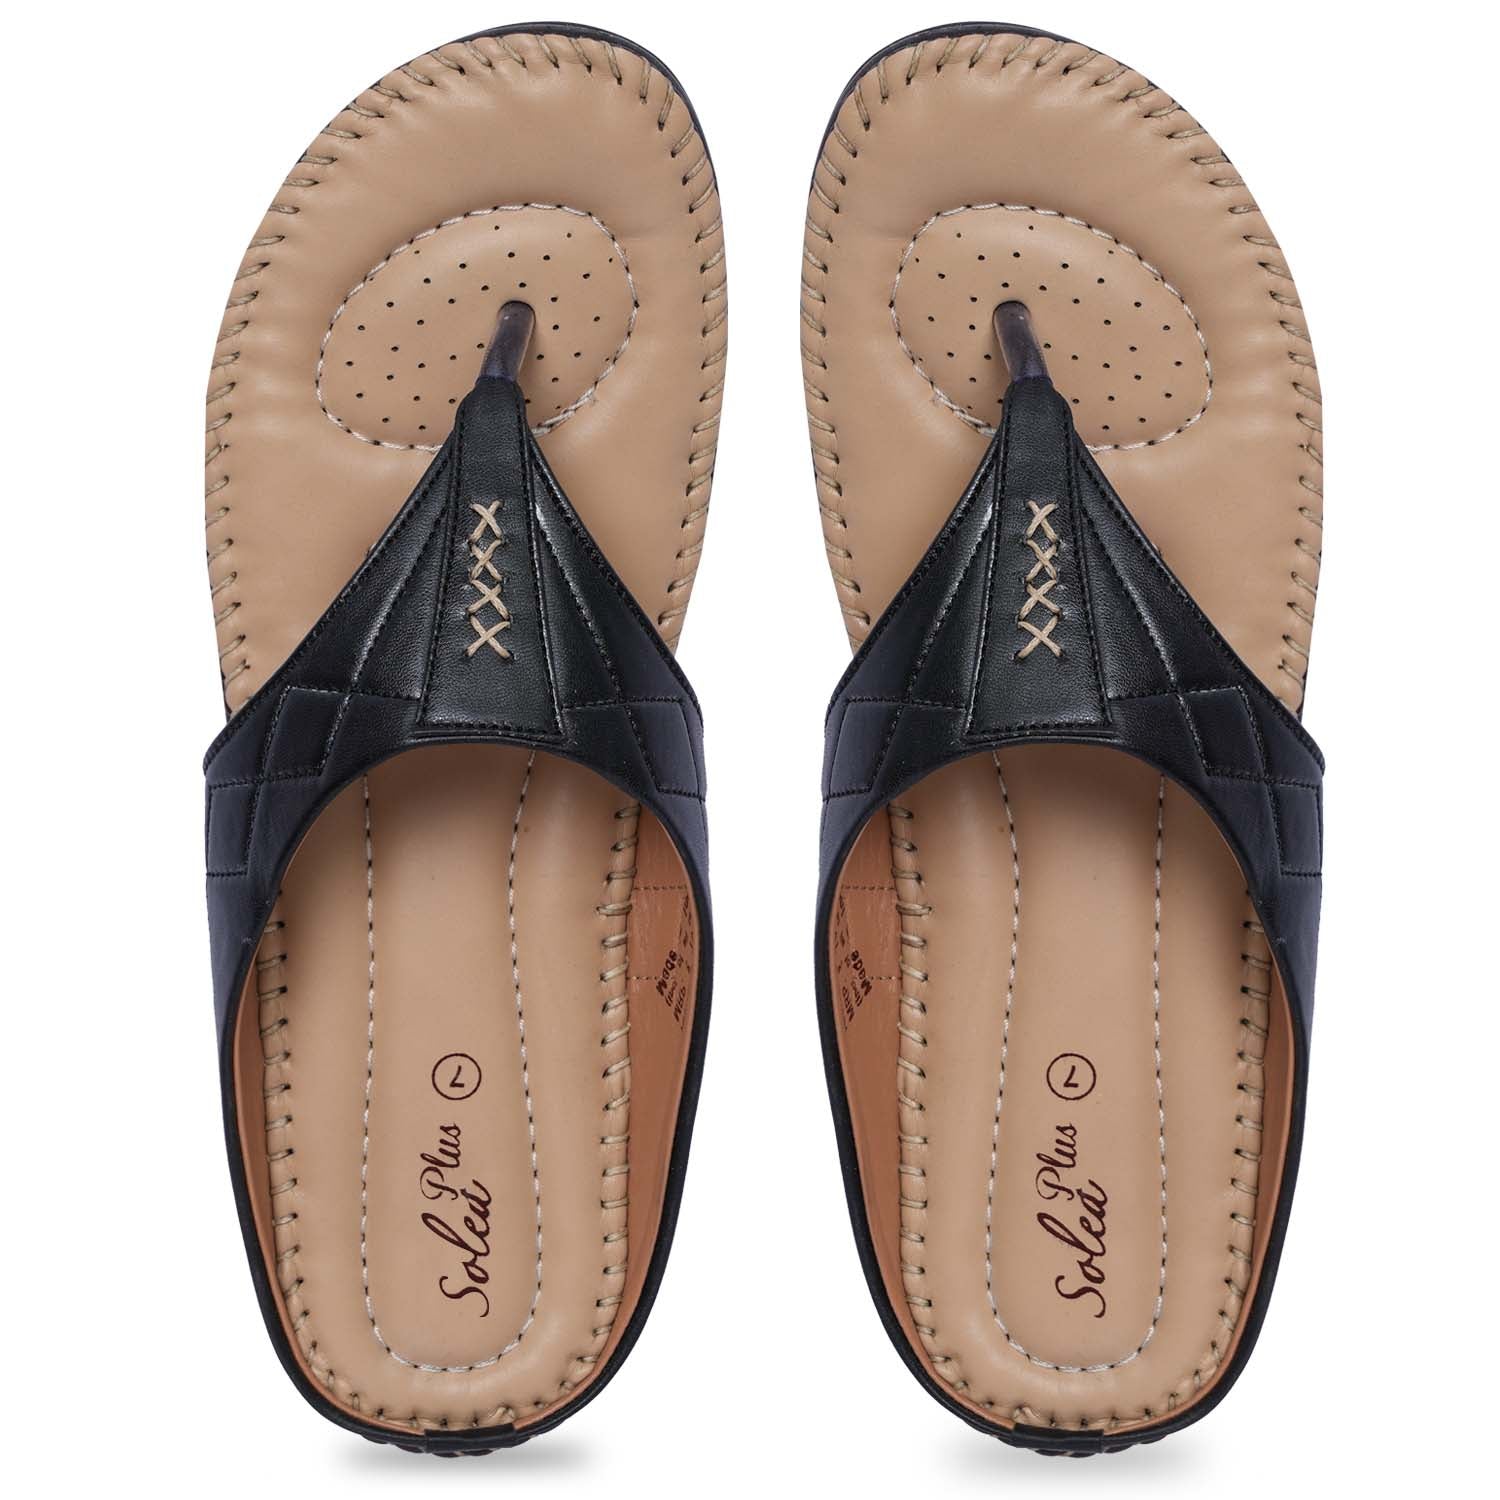 Paragon R1009L Women Sandals | Casual &amp; Formal Sandals | Stylish, Comfortable &amp; Durable | For Daily &amp; Occasion Wear